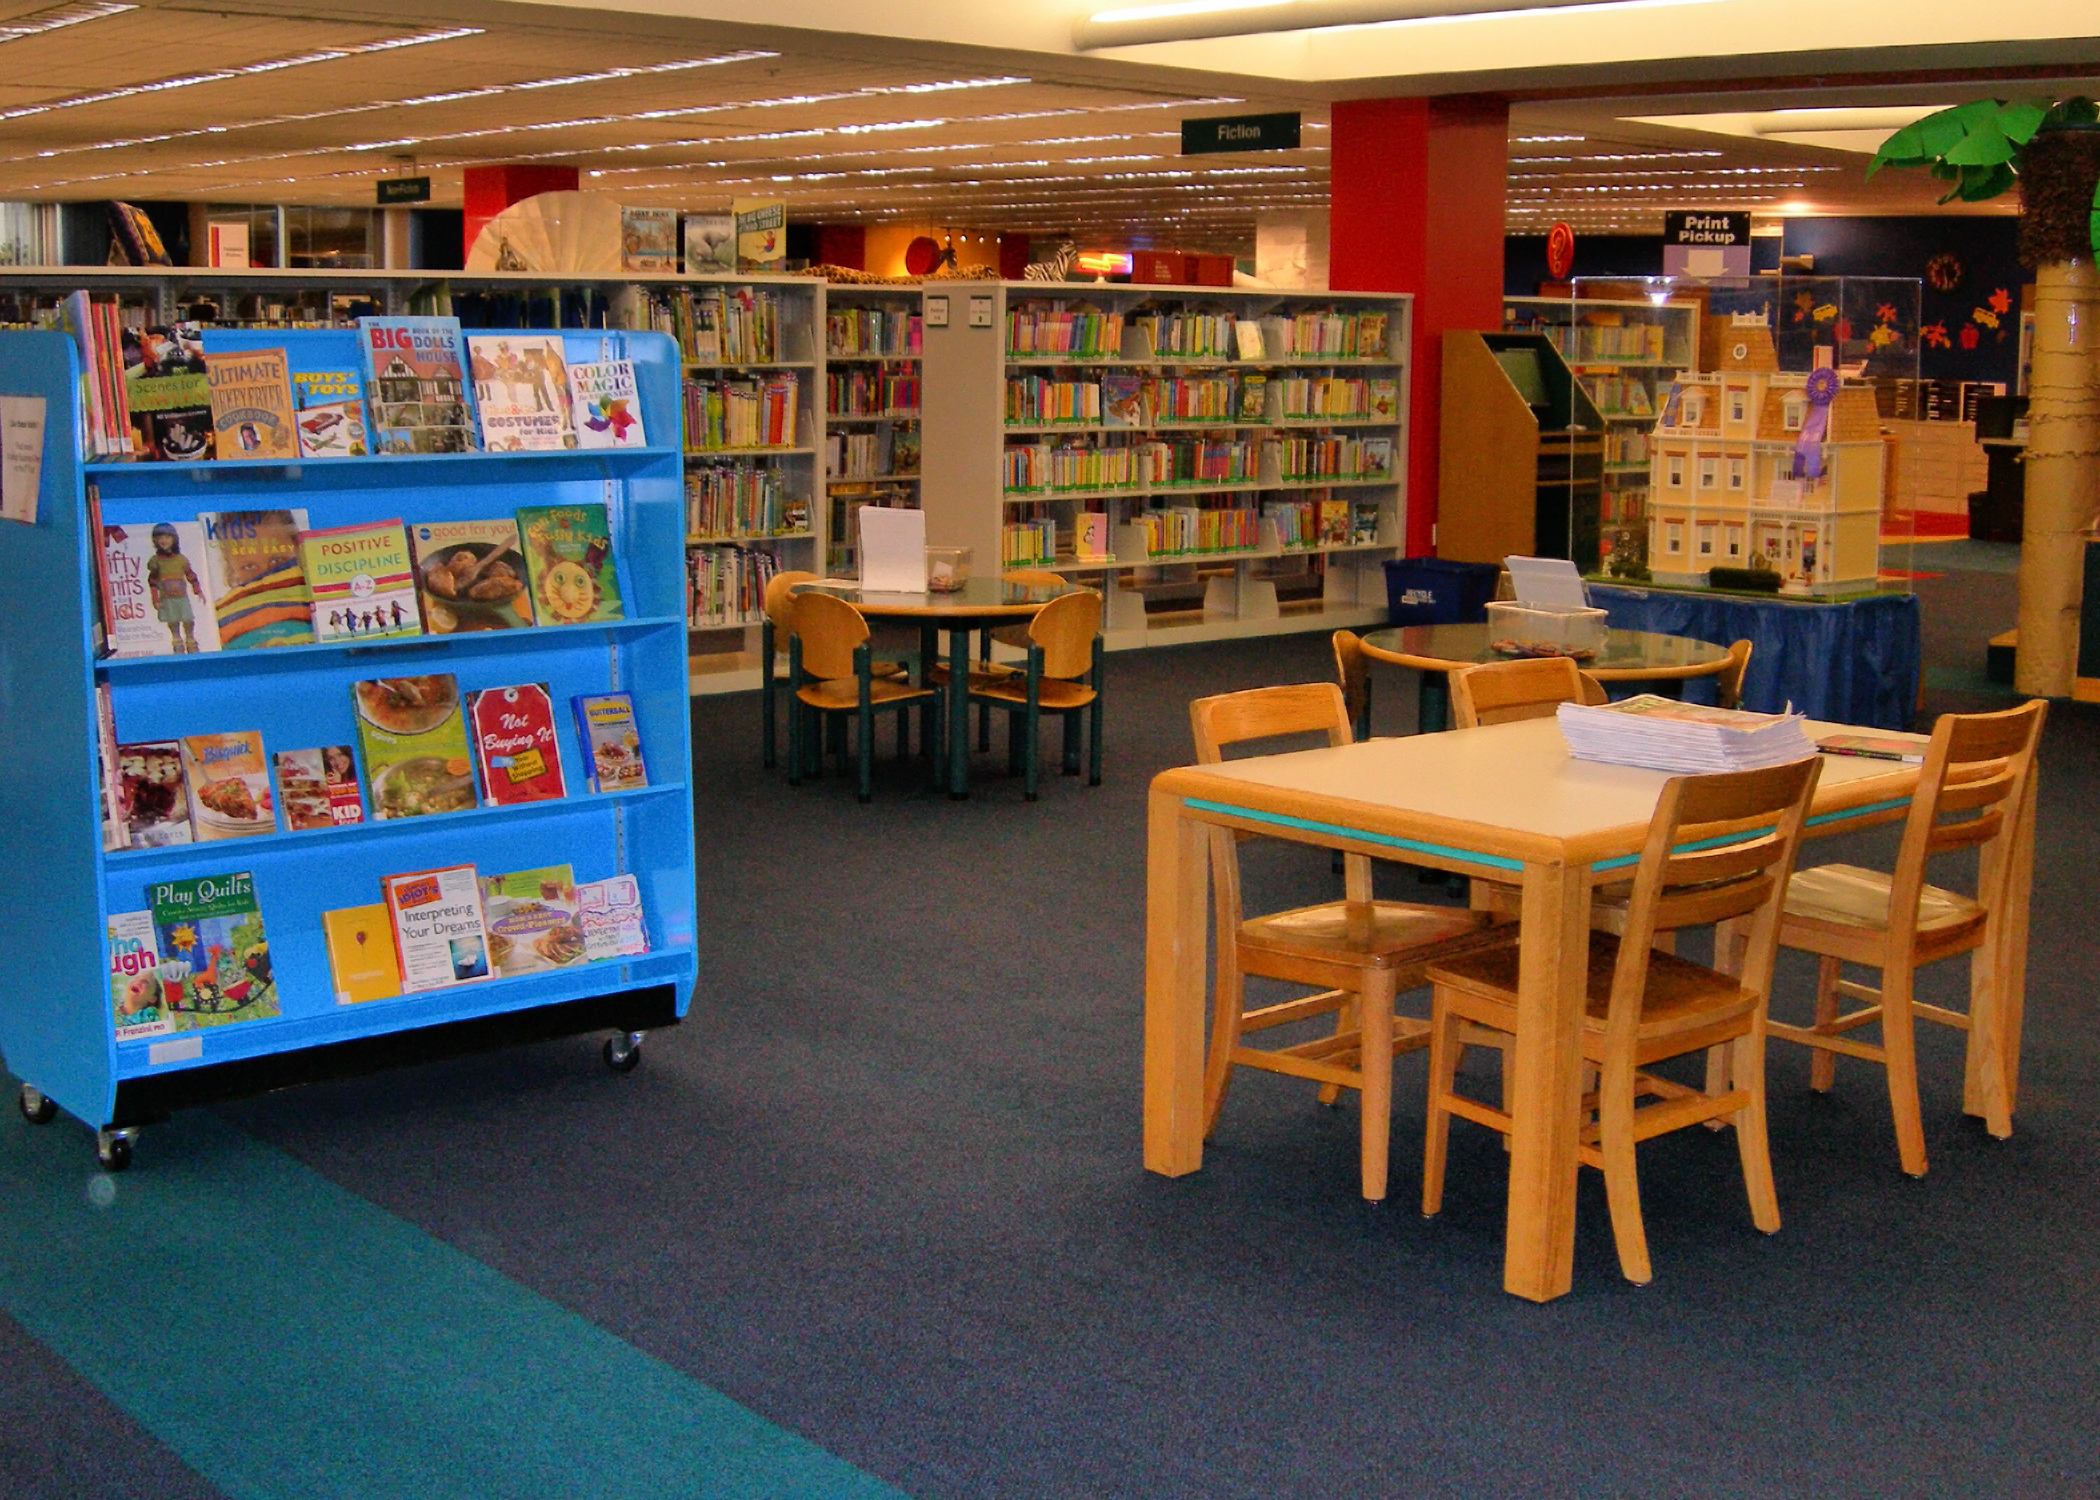 This is our library